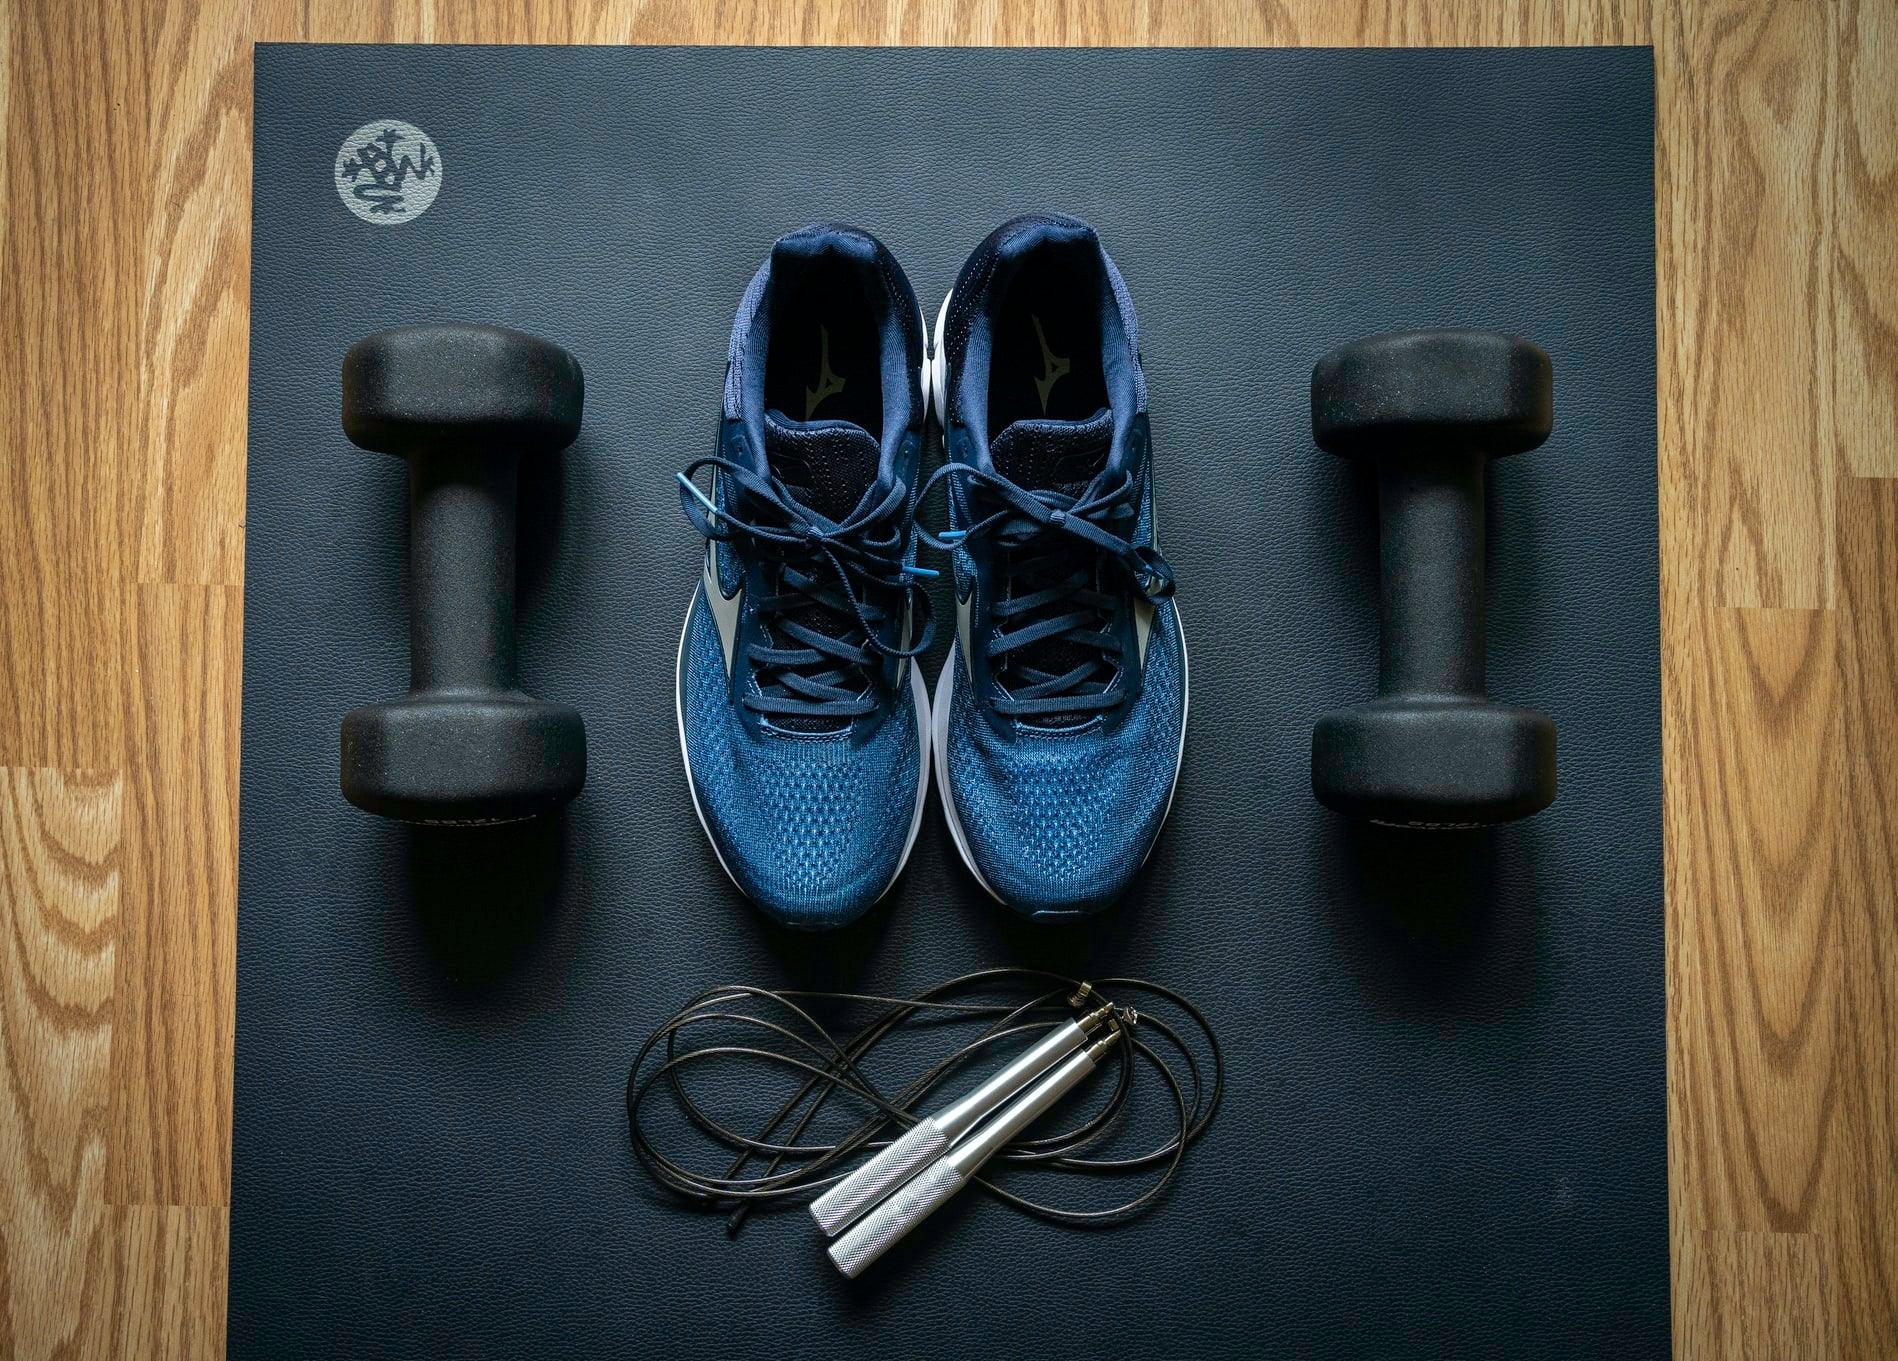 A pair of dumbbells, a jump rope, and a pair of blue shoes on a black exercise mat